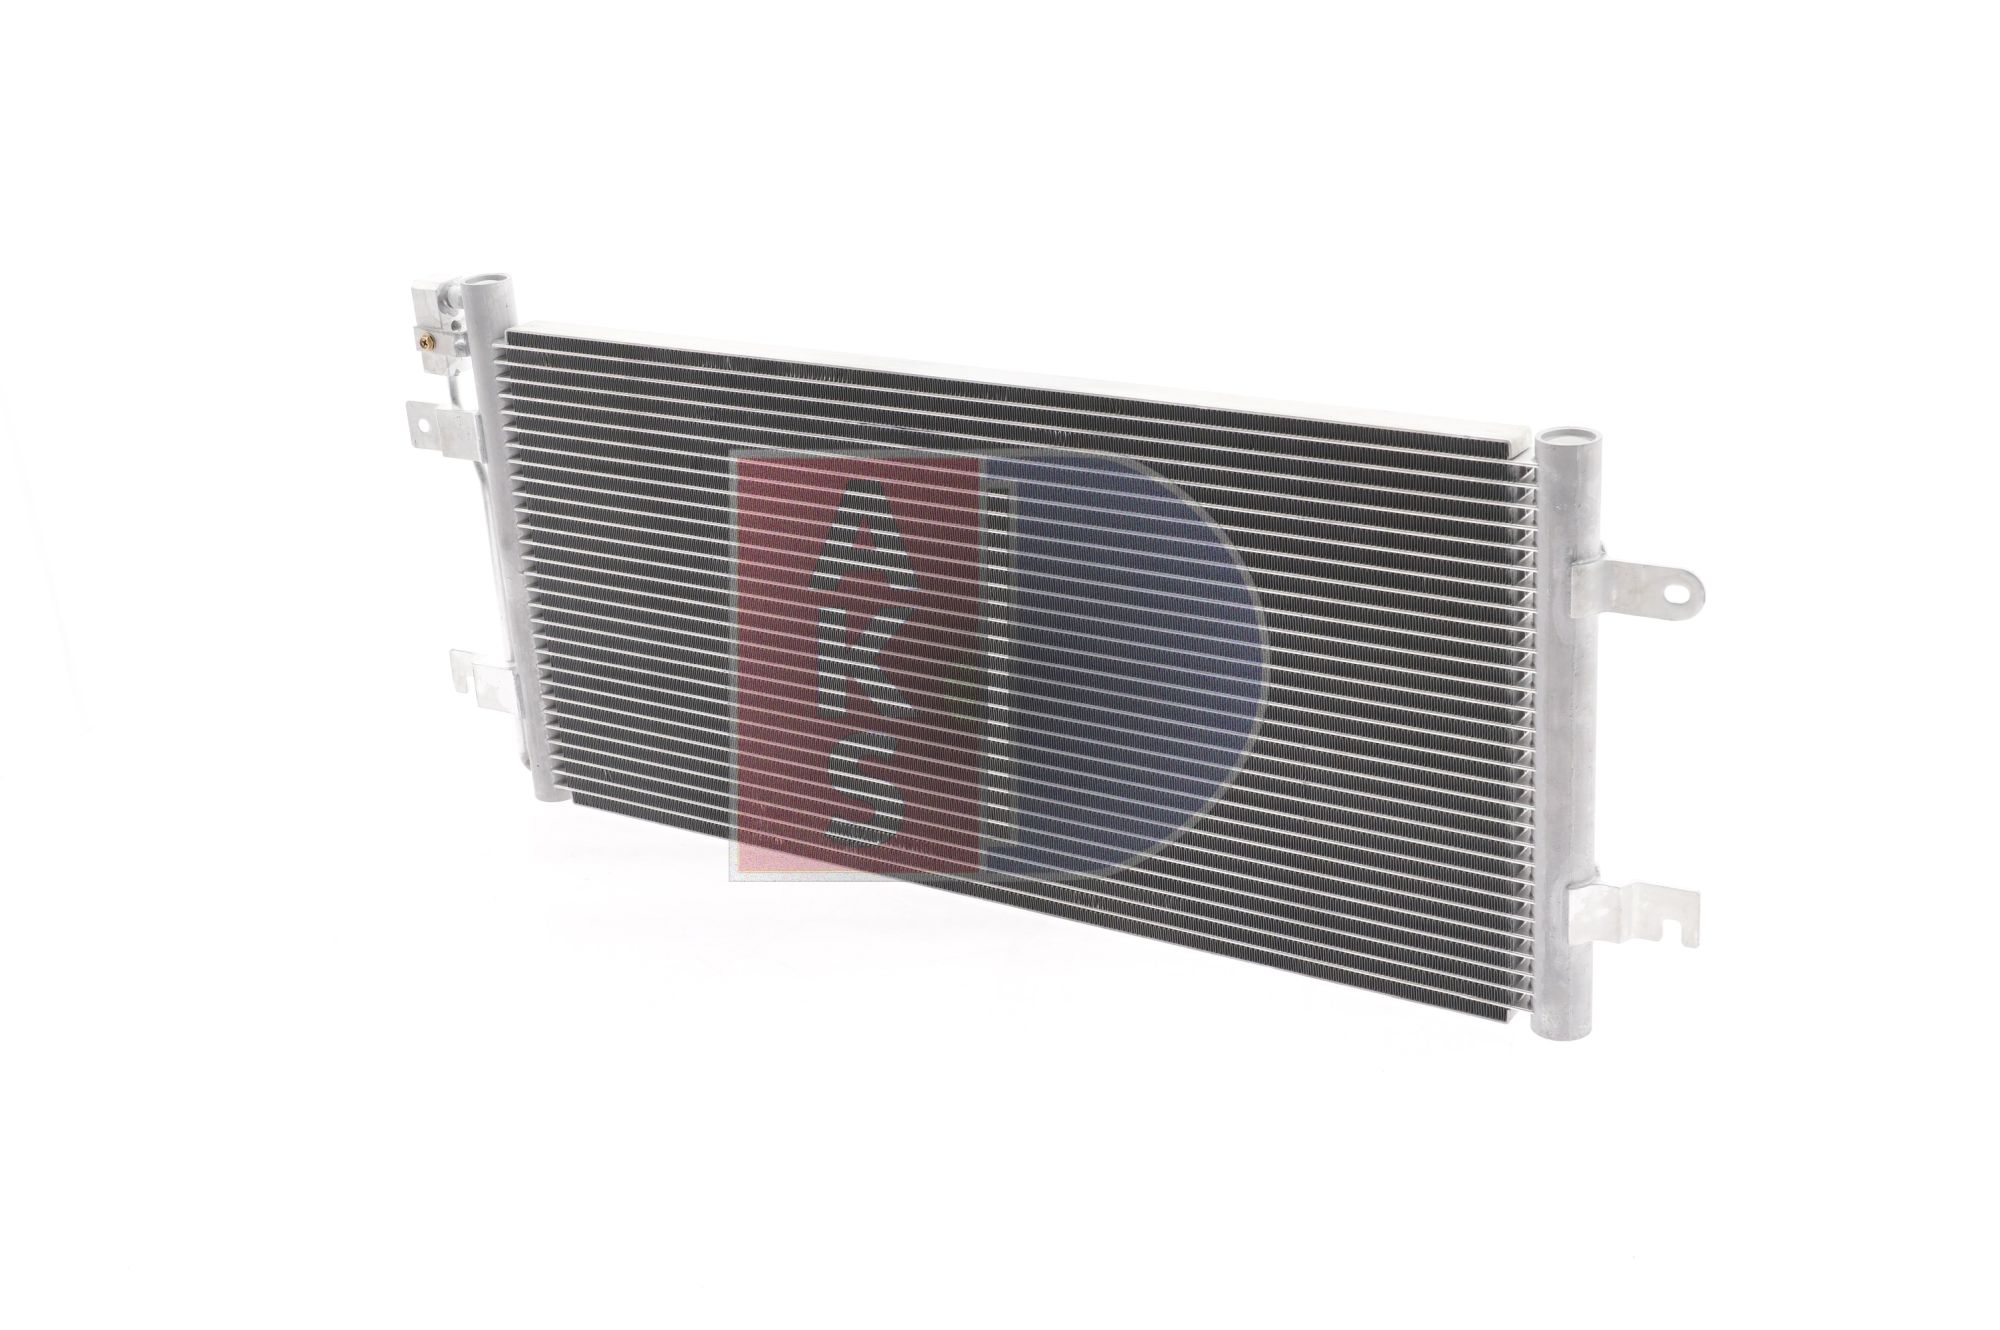 AKS DASIS 242050N Air conditioning condenser without dryer, 11,8mm, 7,6mm, 635mm